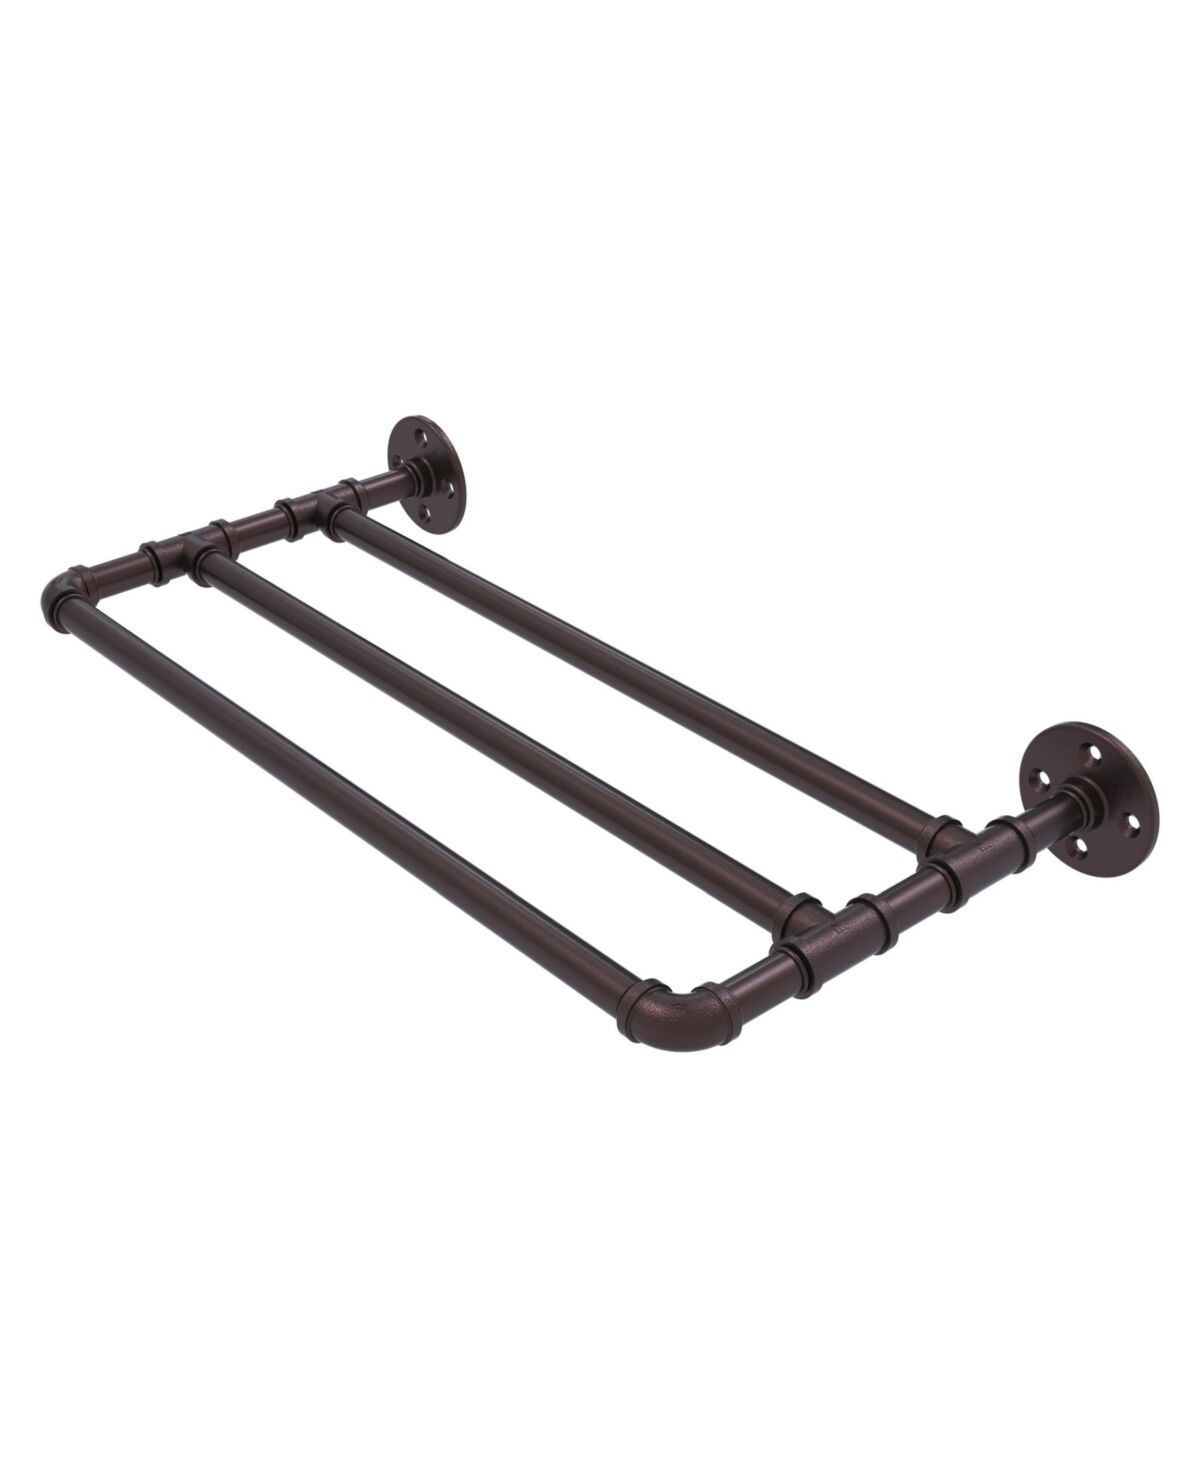 Allied Pipeline Collection 18 Inch Wall Mounted Towel Shelf - Antique bronze